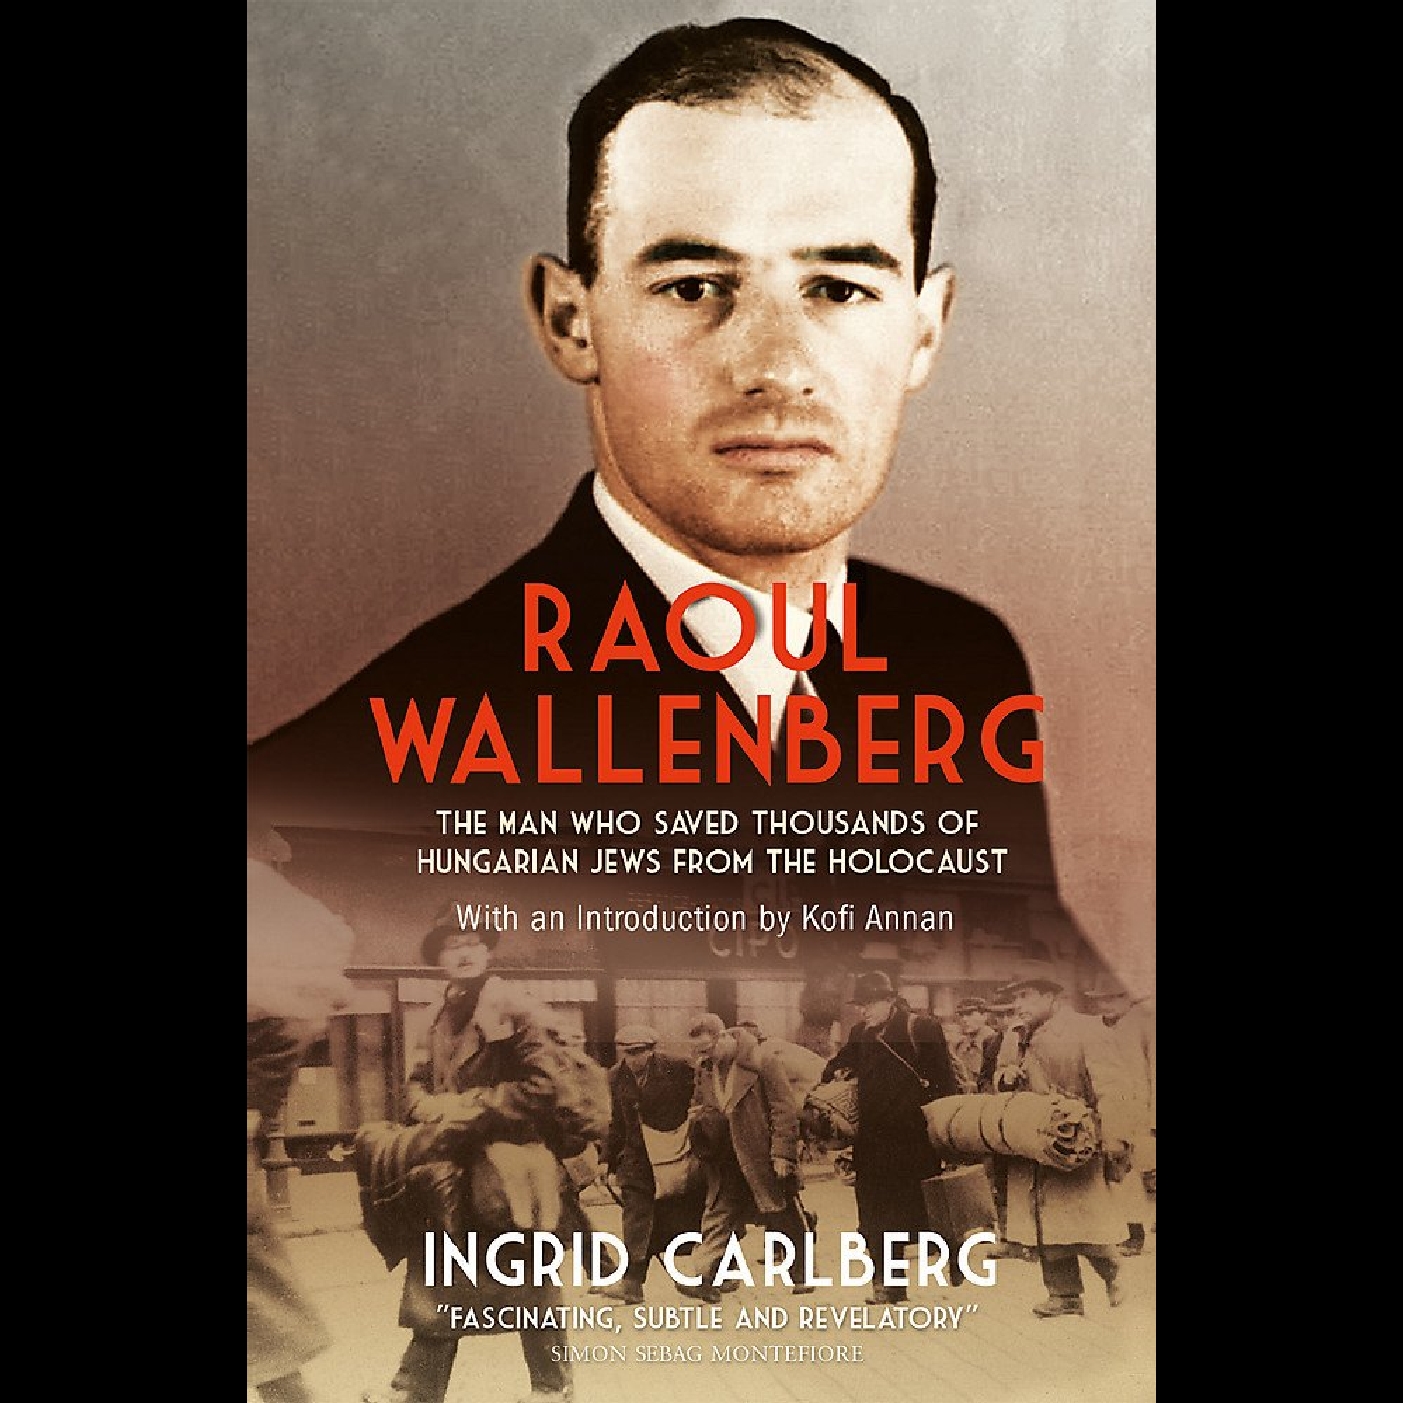 Raoul Wallenberg #1 - The Man Who Saved Thousands of Hungarian Jews